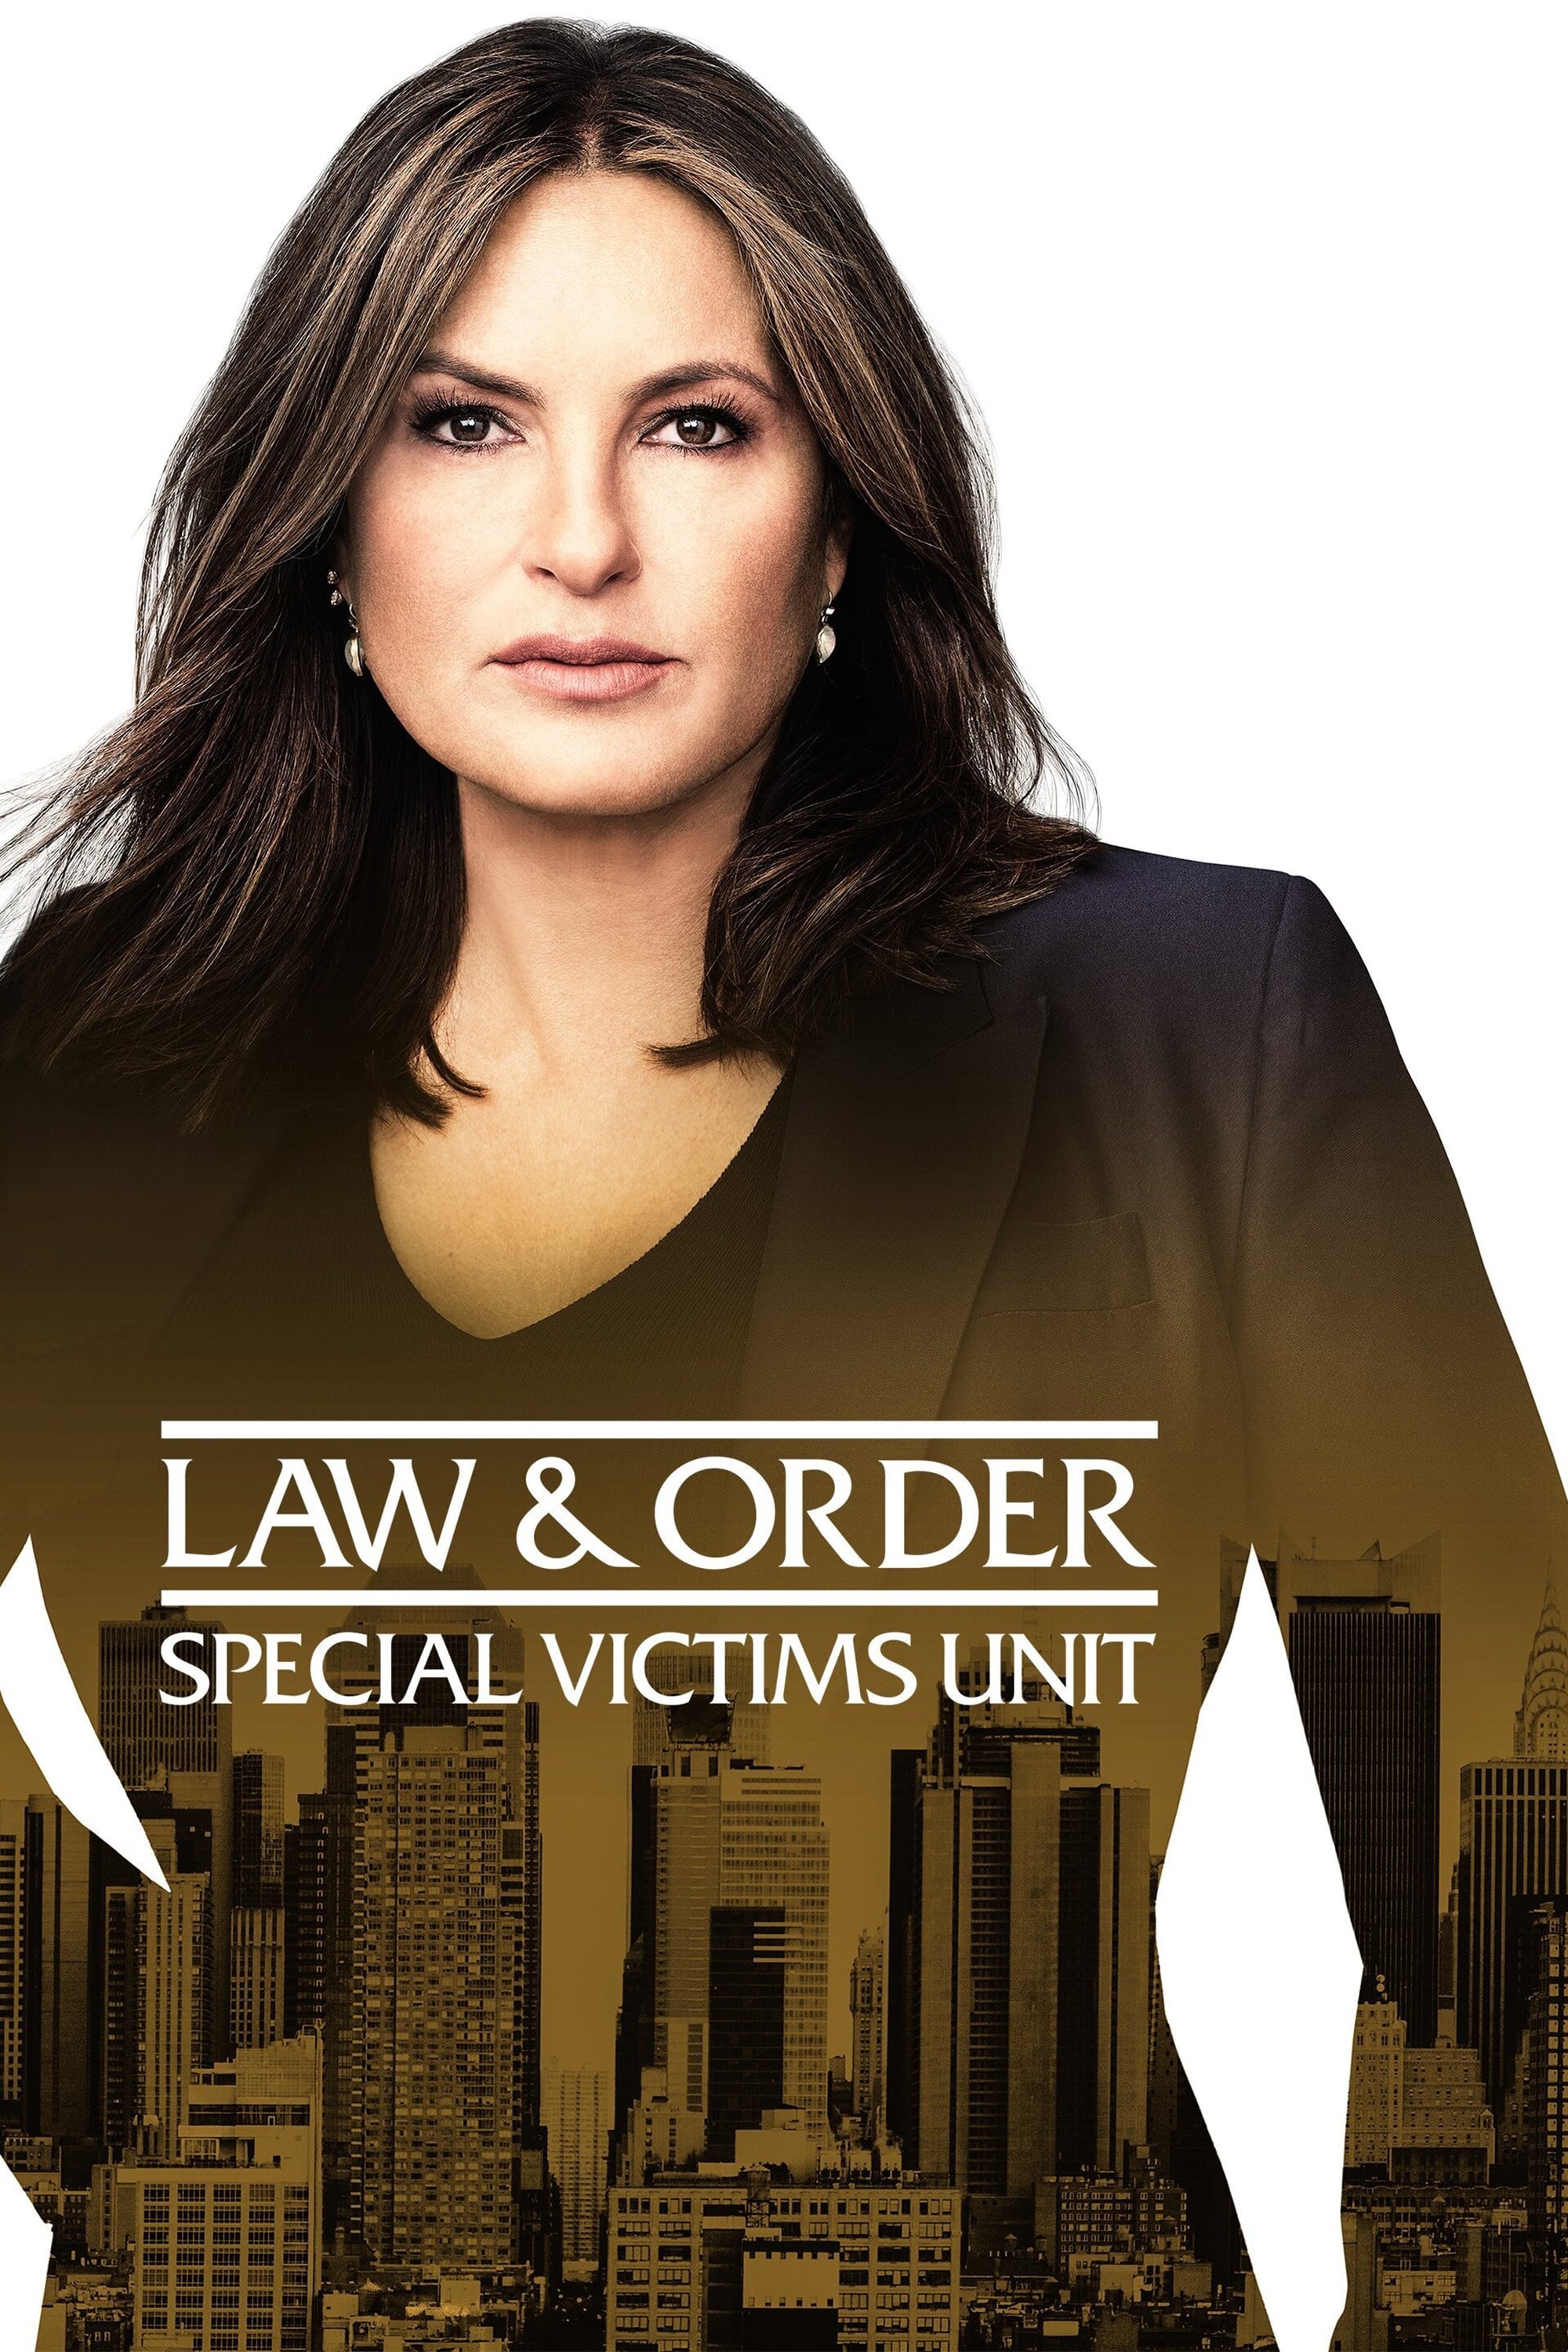 Law & Order: Special Victims Unit TV Shows About Sexual Assault